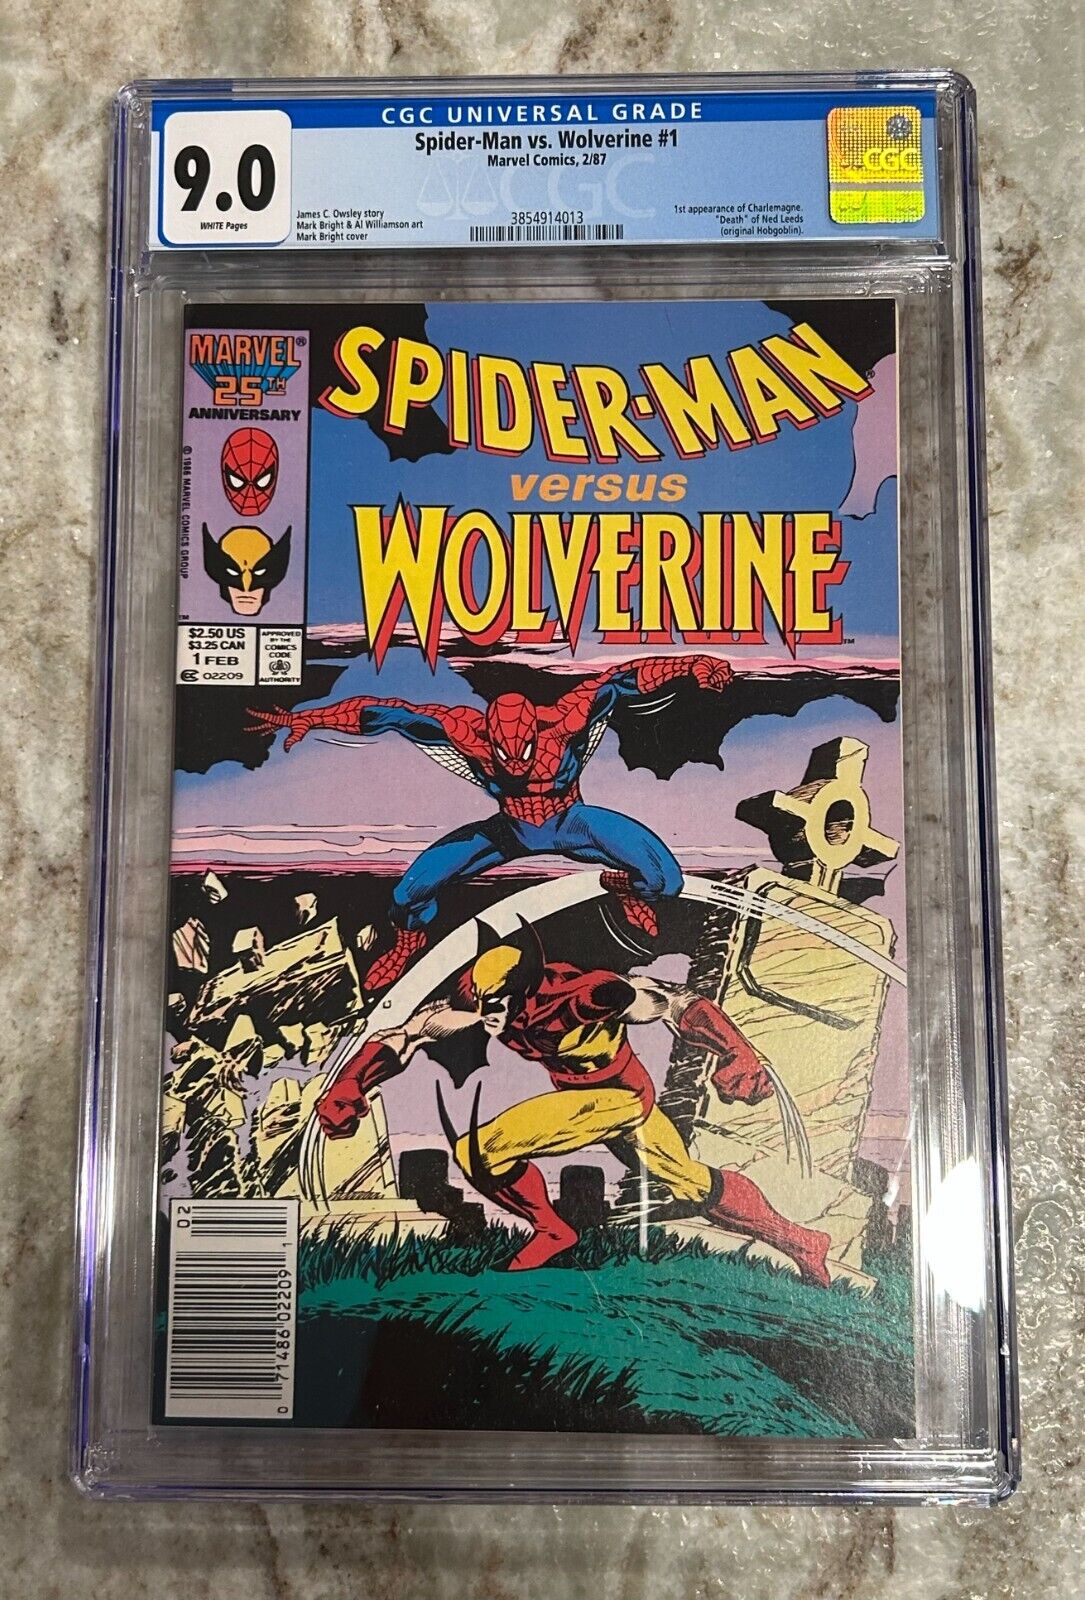 SPIDERMAN VS WOLVERINE #1  CGC 9.0 White Pages